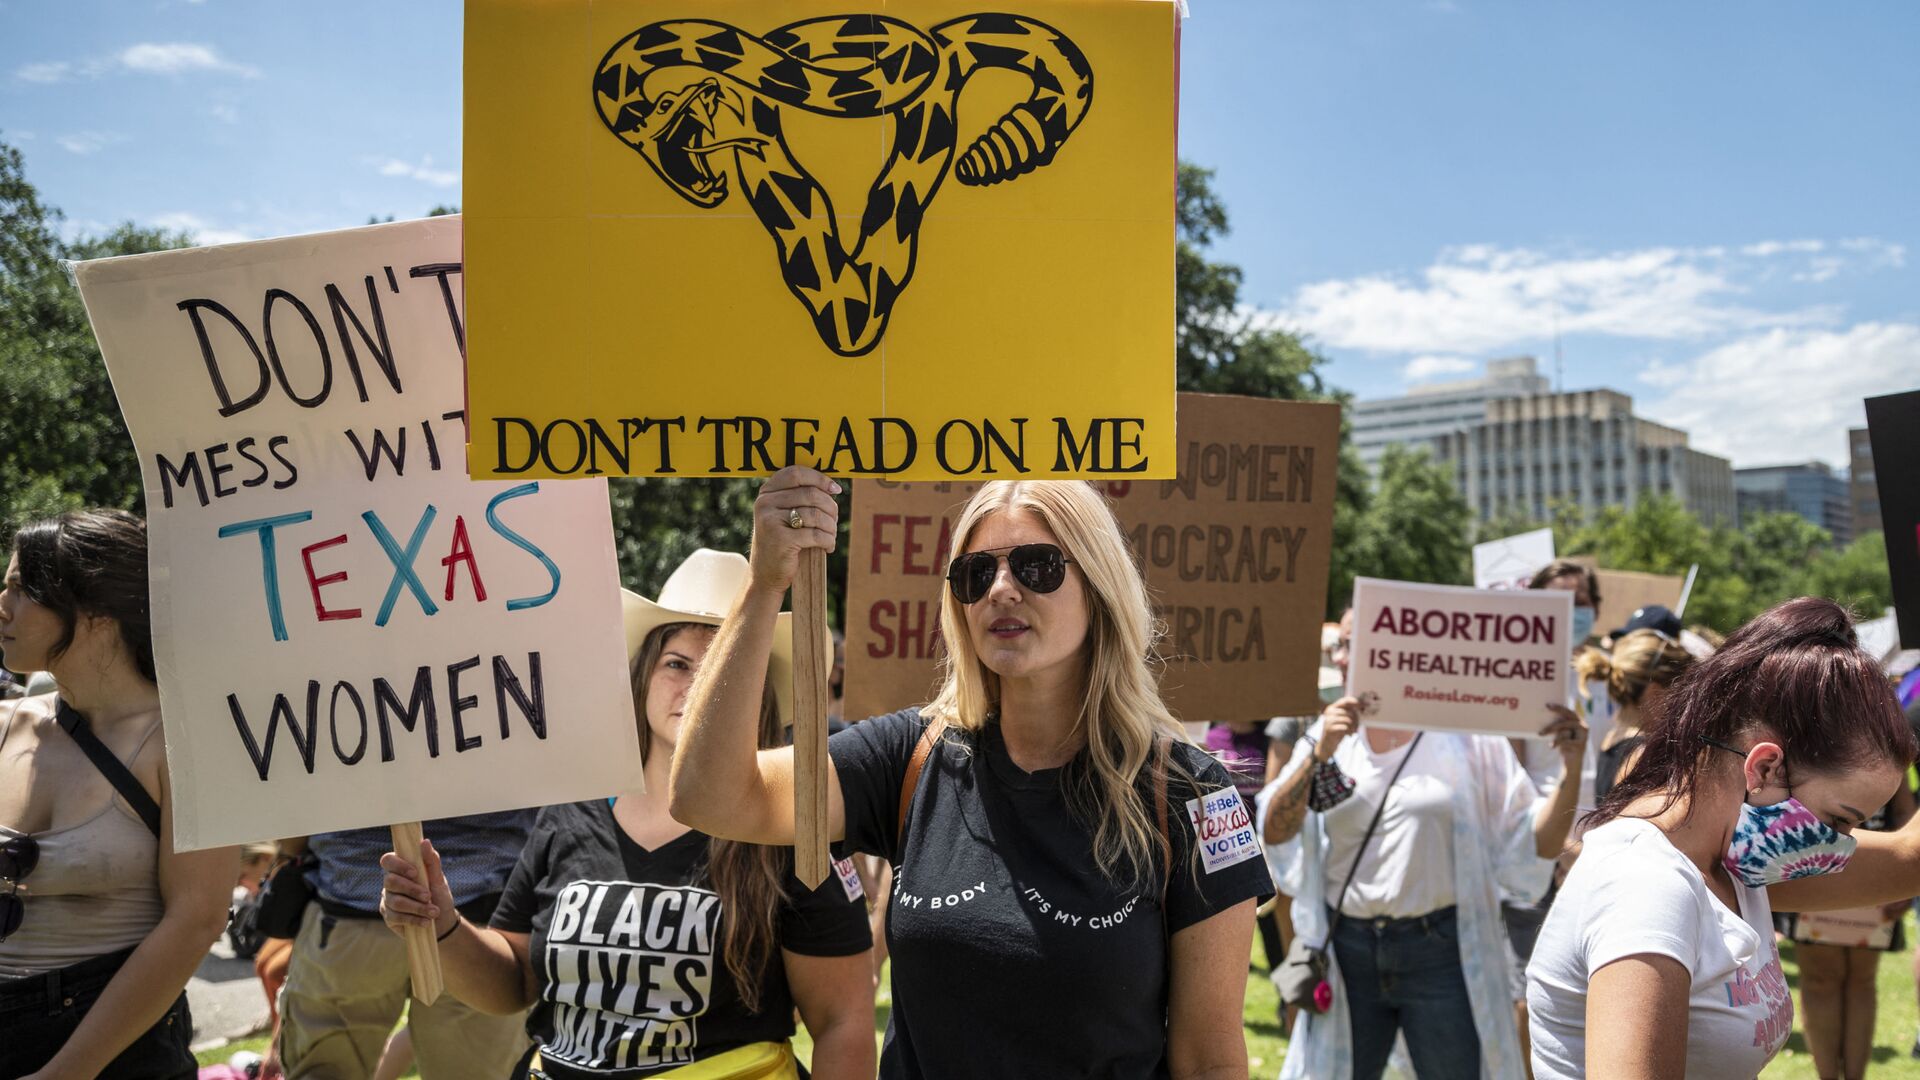 Protesters hold up signs at a protest outside the Texas state capitol on May 29, 2021 in Austin, Texas. - Sputnik International, 1920, 07.10.2021